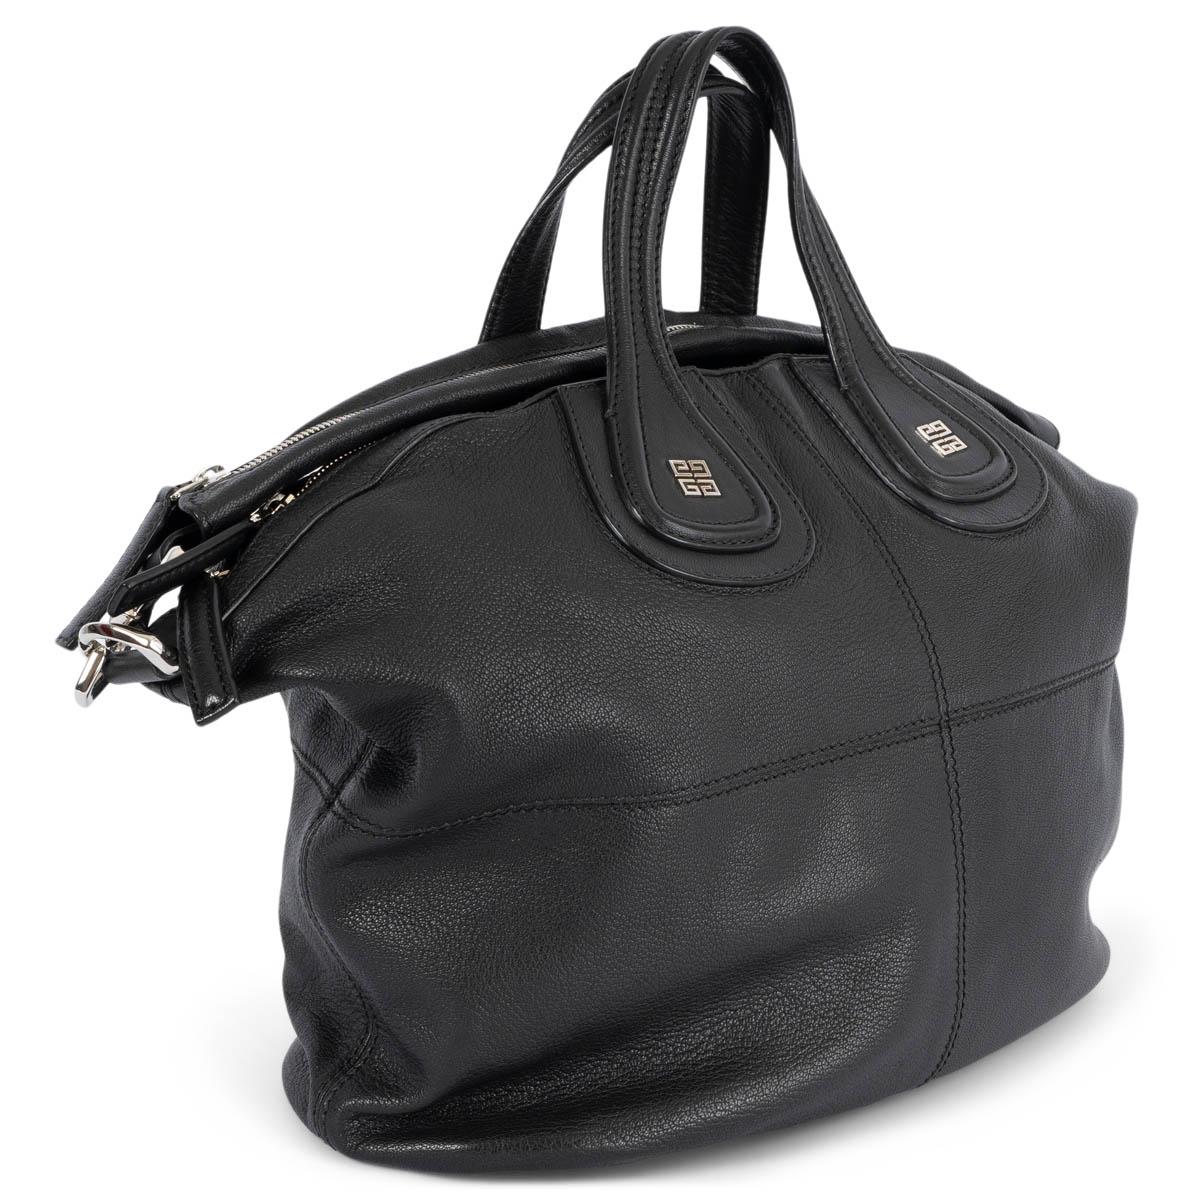 100% authentic Givenchy Nightingale bag in a black goatskin leather featuring dual top handles, detachable shoulder strap with zipper accent detail. Metal logo at bottom of top handles. Opens with a zip closure on top. Lined in black canvas with two